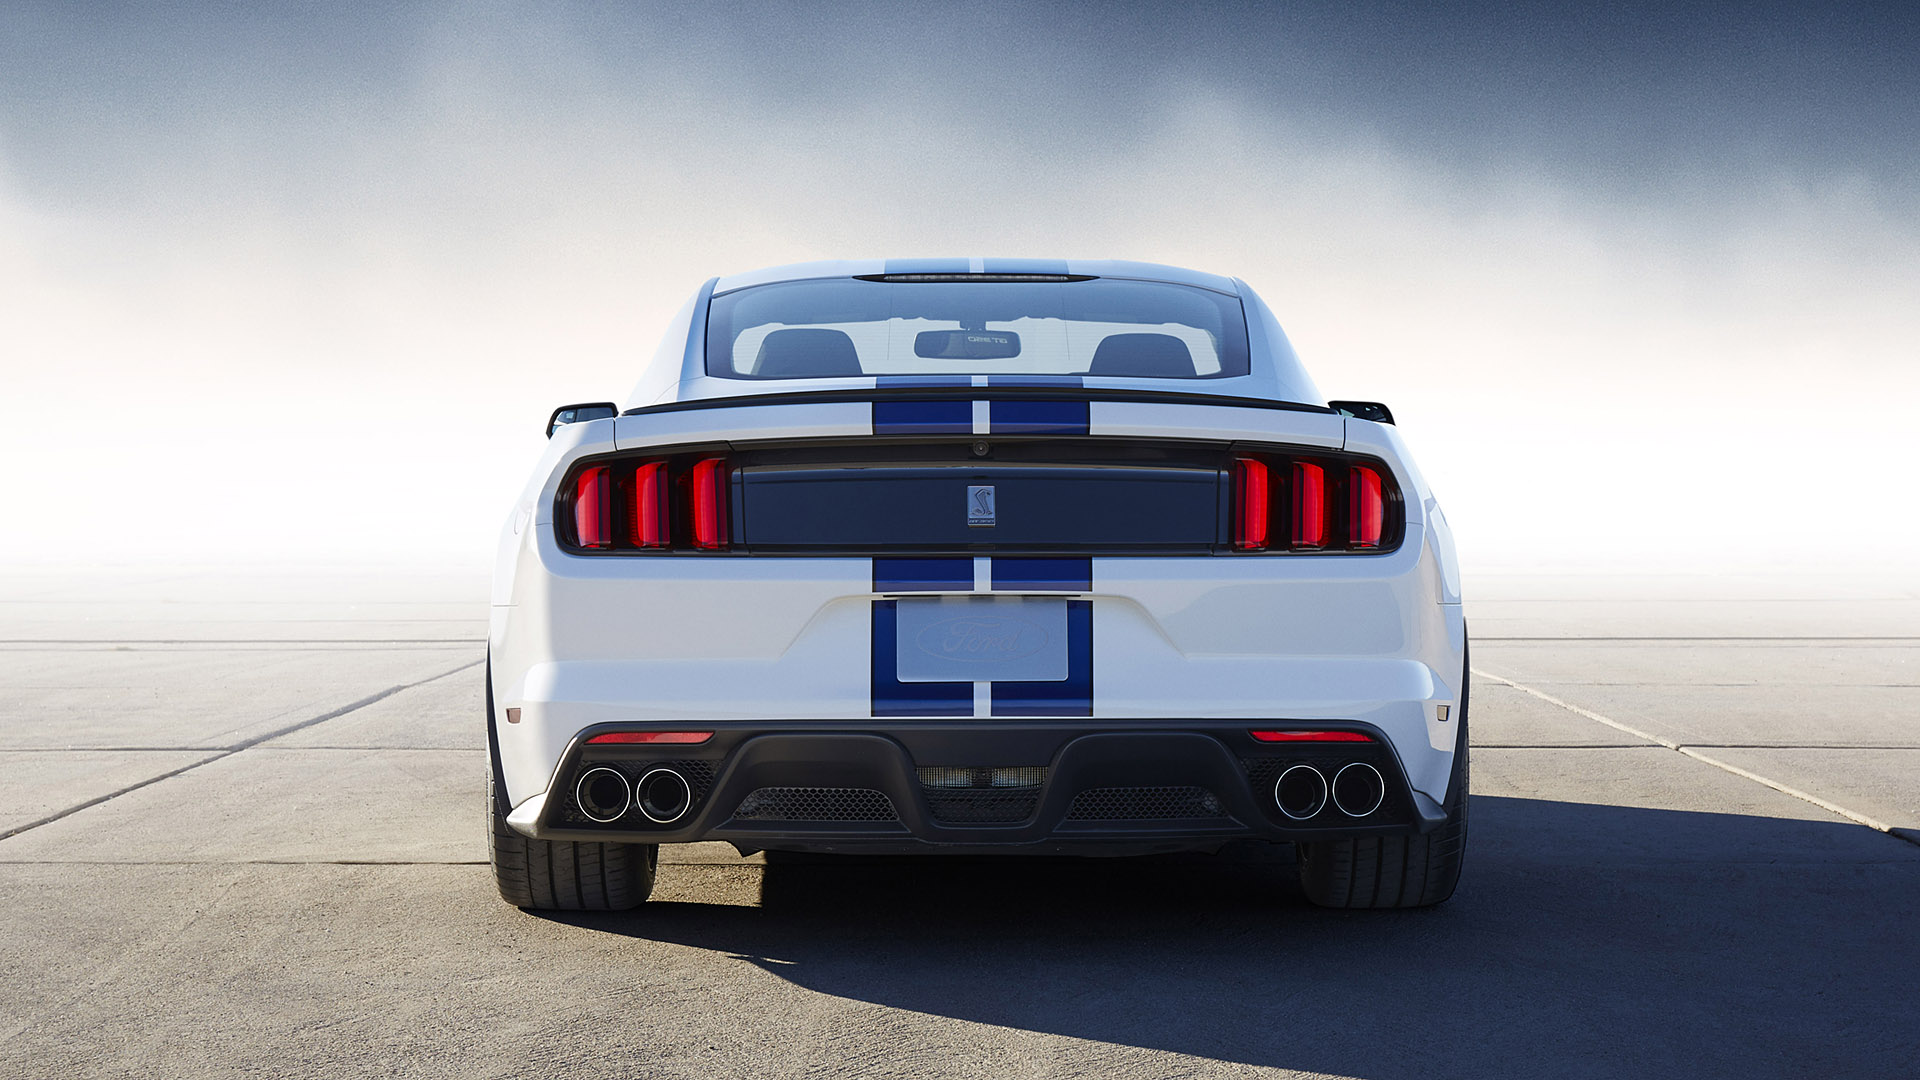 Ford Shelby Mustang Gt350 Wallpaper